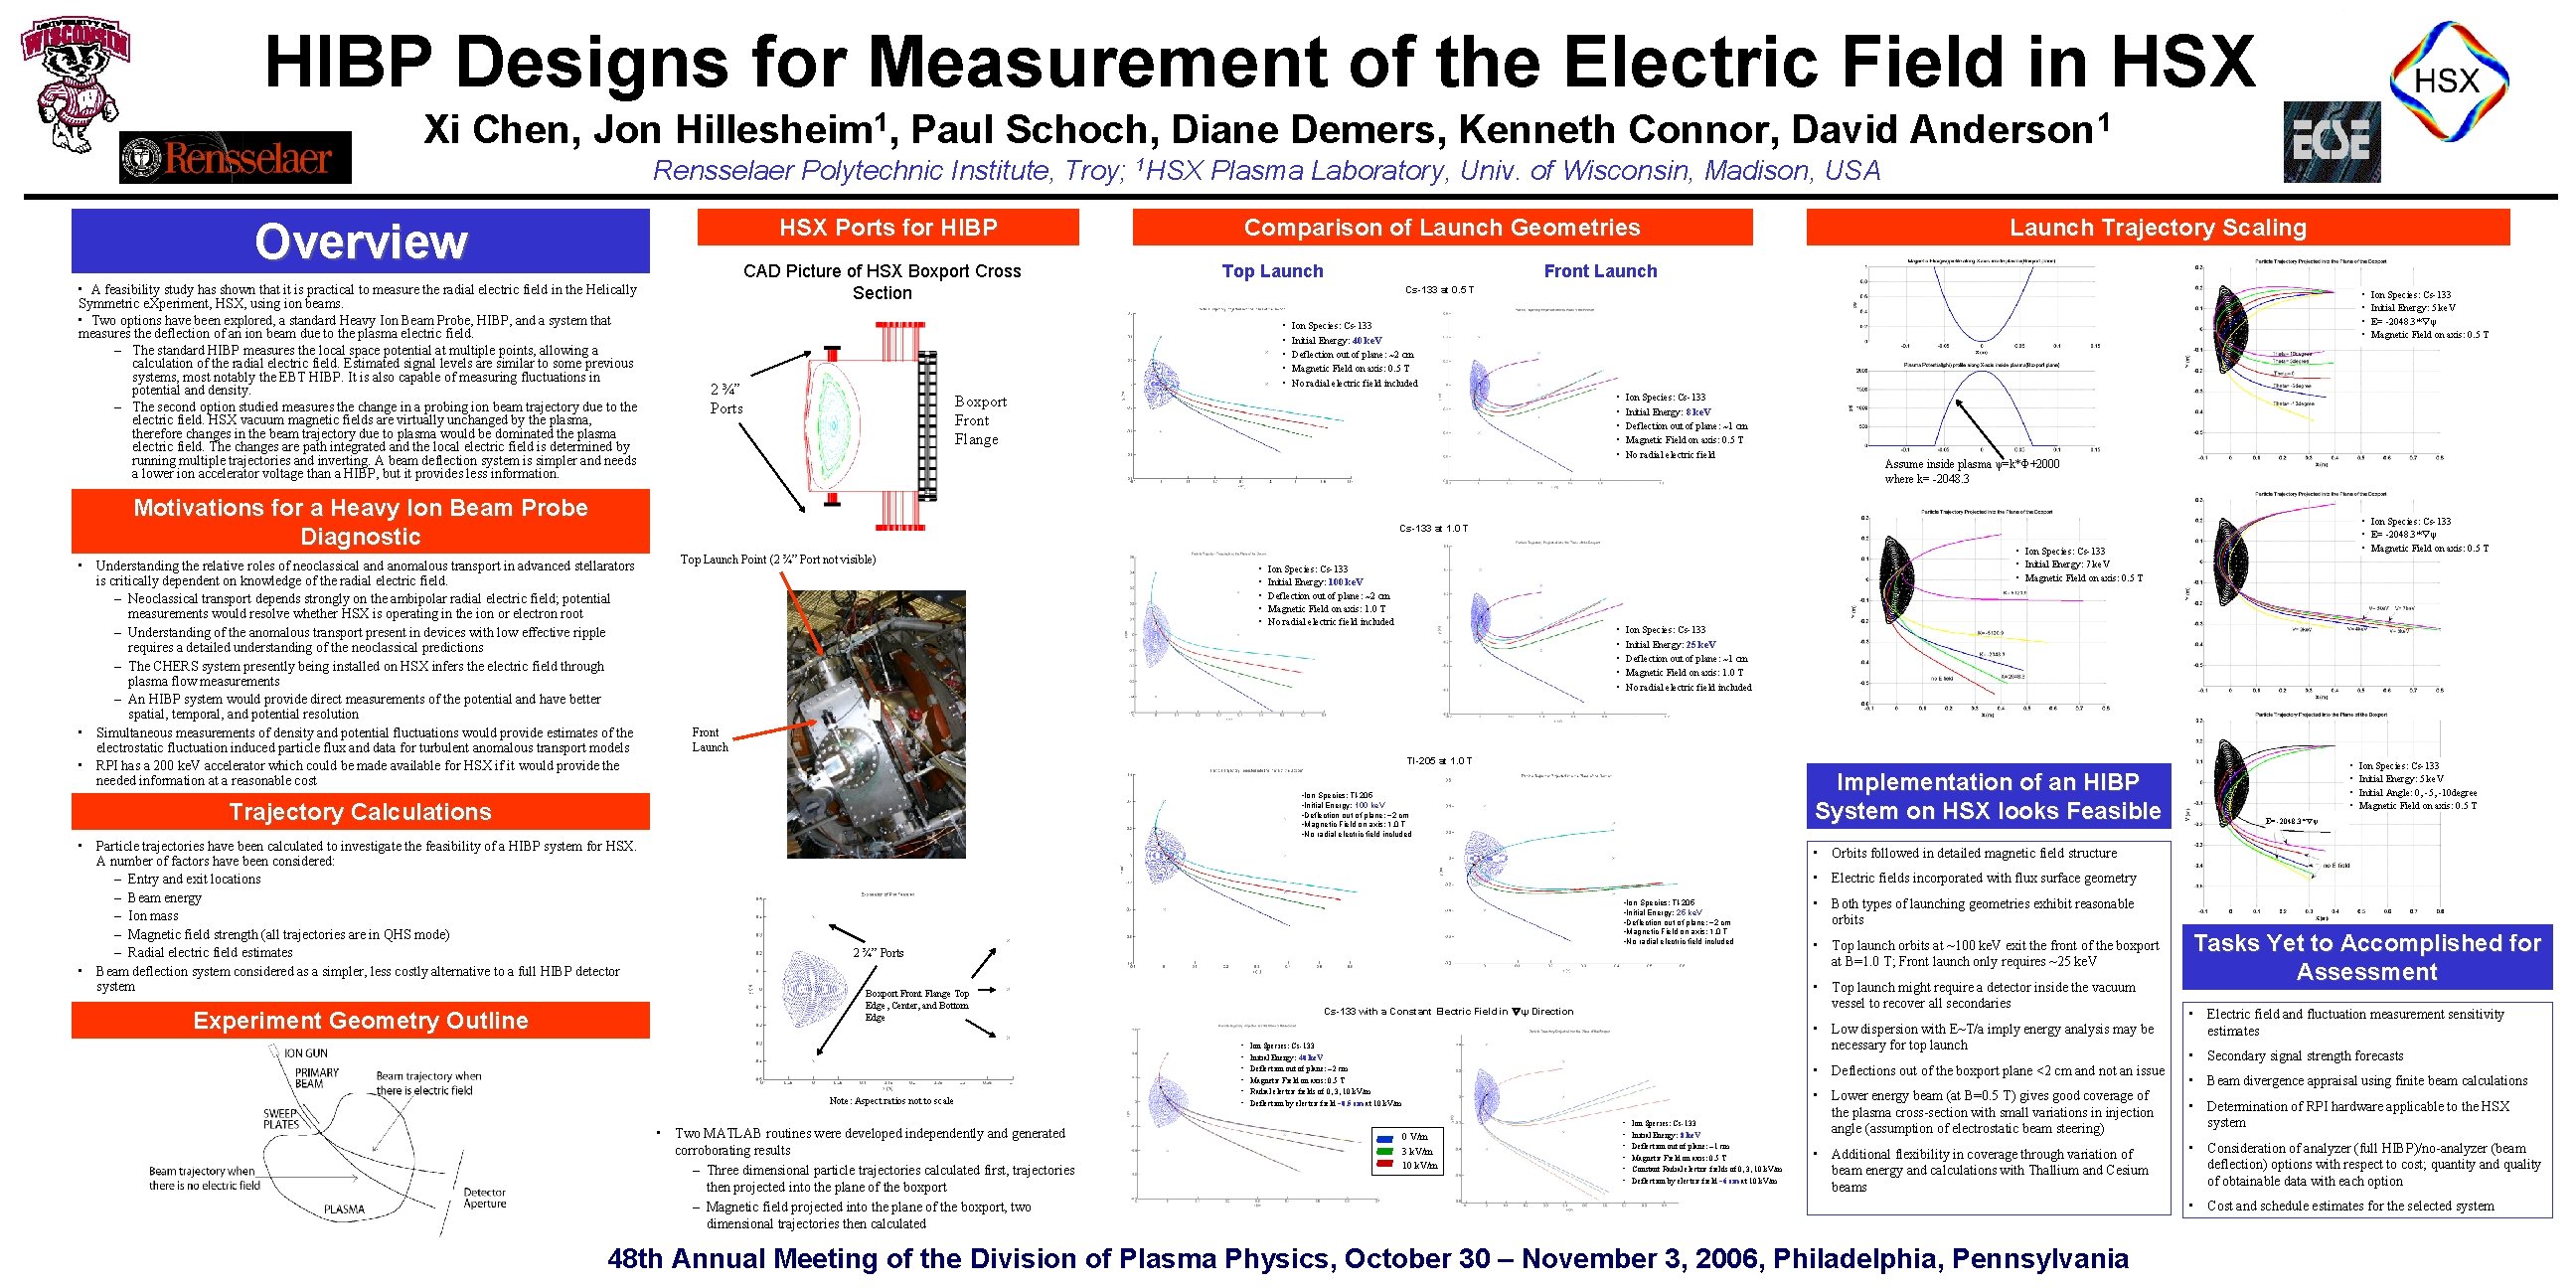 HIBP Designs for Measurement of the Electric Field in HSX Xi Chen, Jon Hillesheim